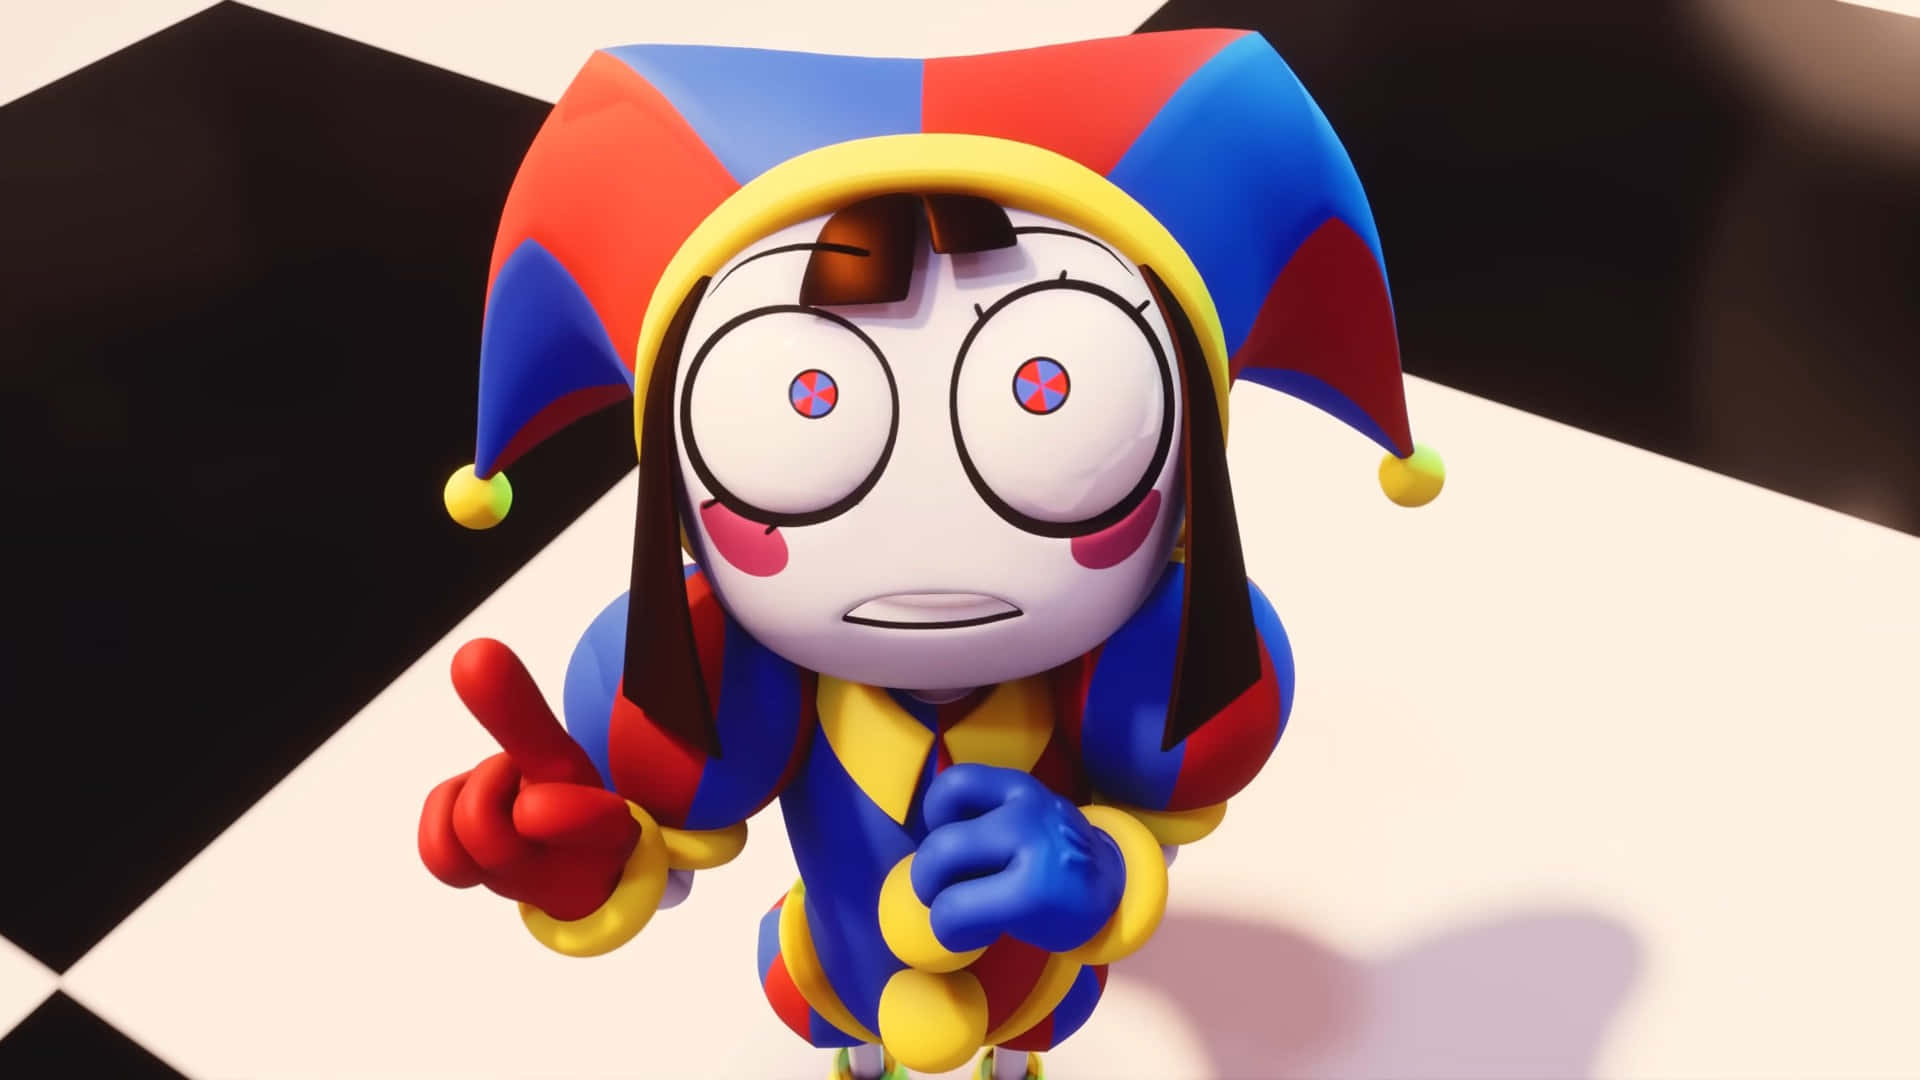 Colorful Jester Character3 D Render Wallpaper